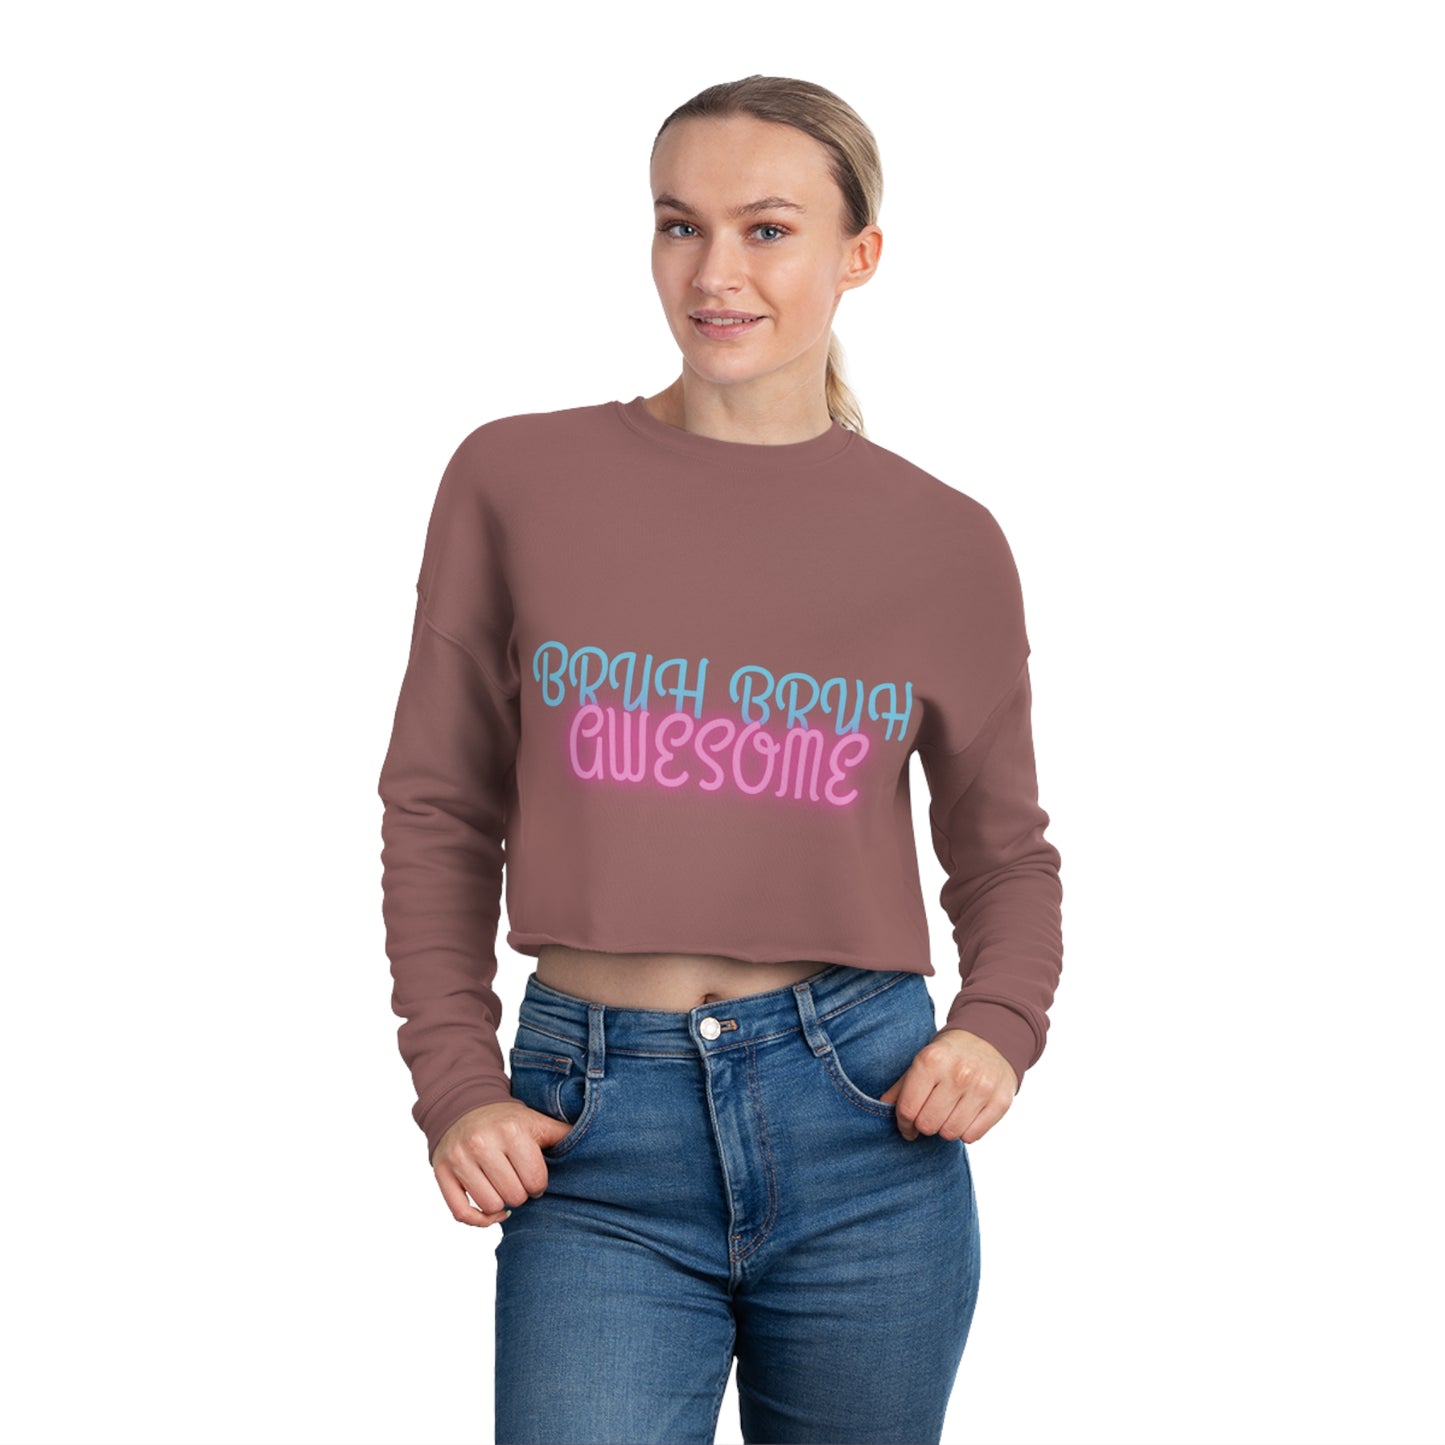 "Bruh bruh awesome" Women's Cropped Sweatshirt